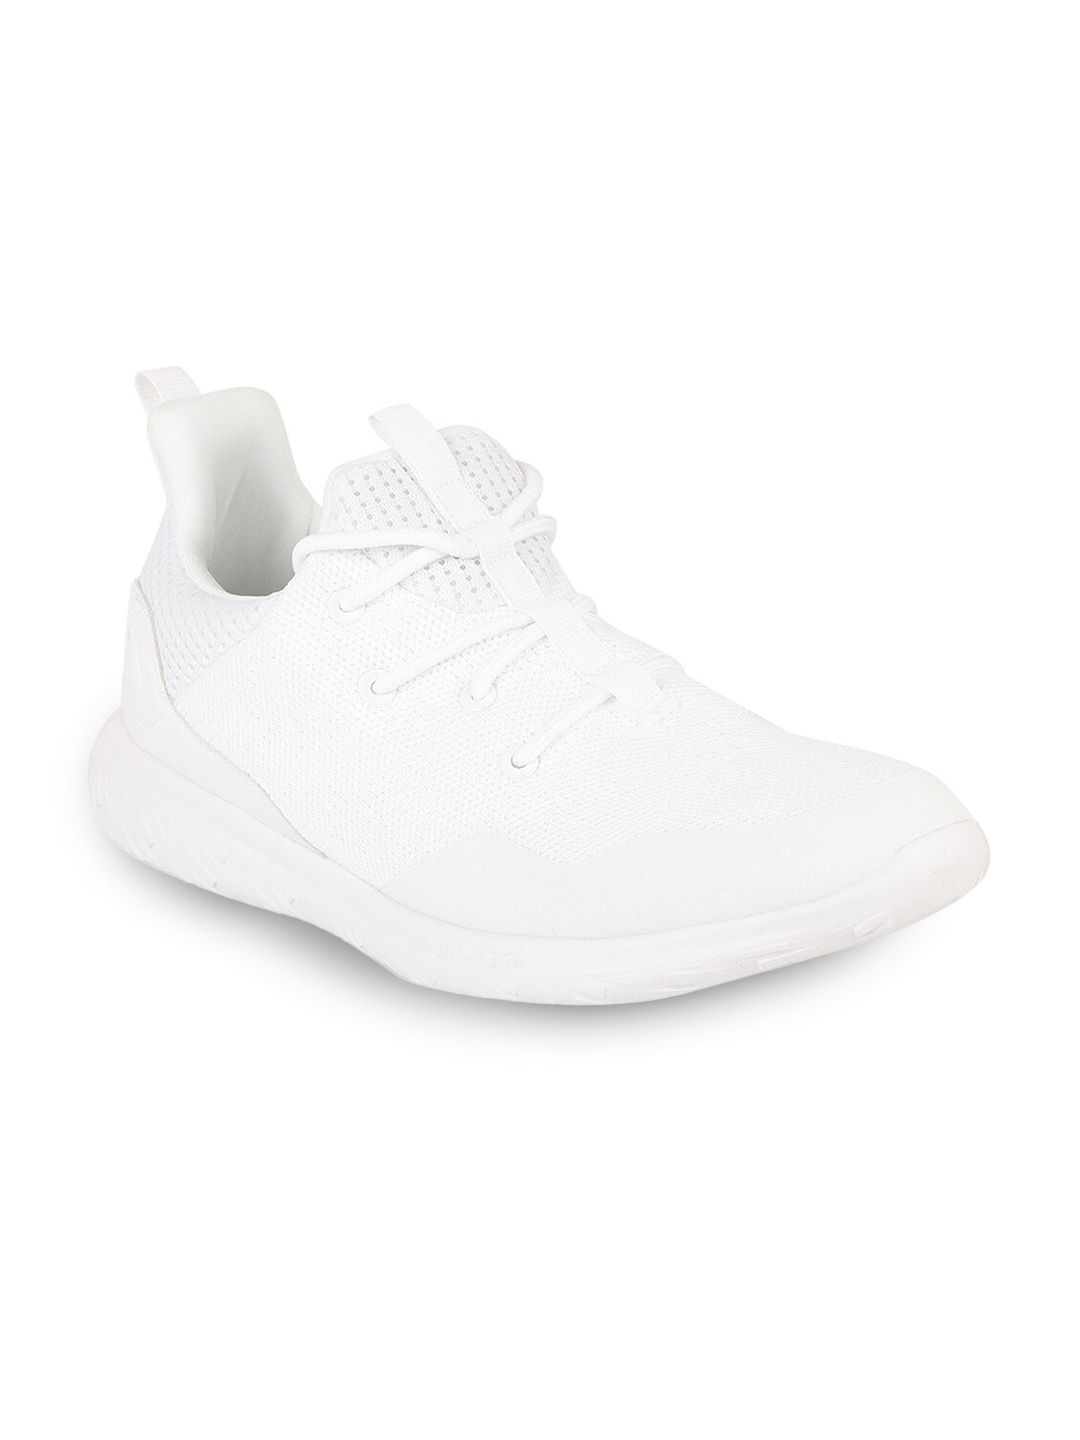 hummel Unisex White Mesh Training or Gym Shoes Price in India